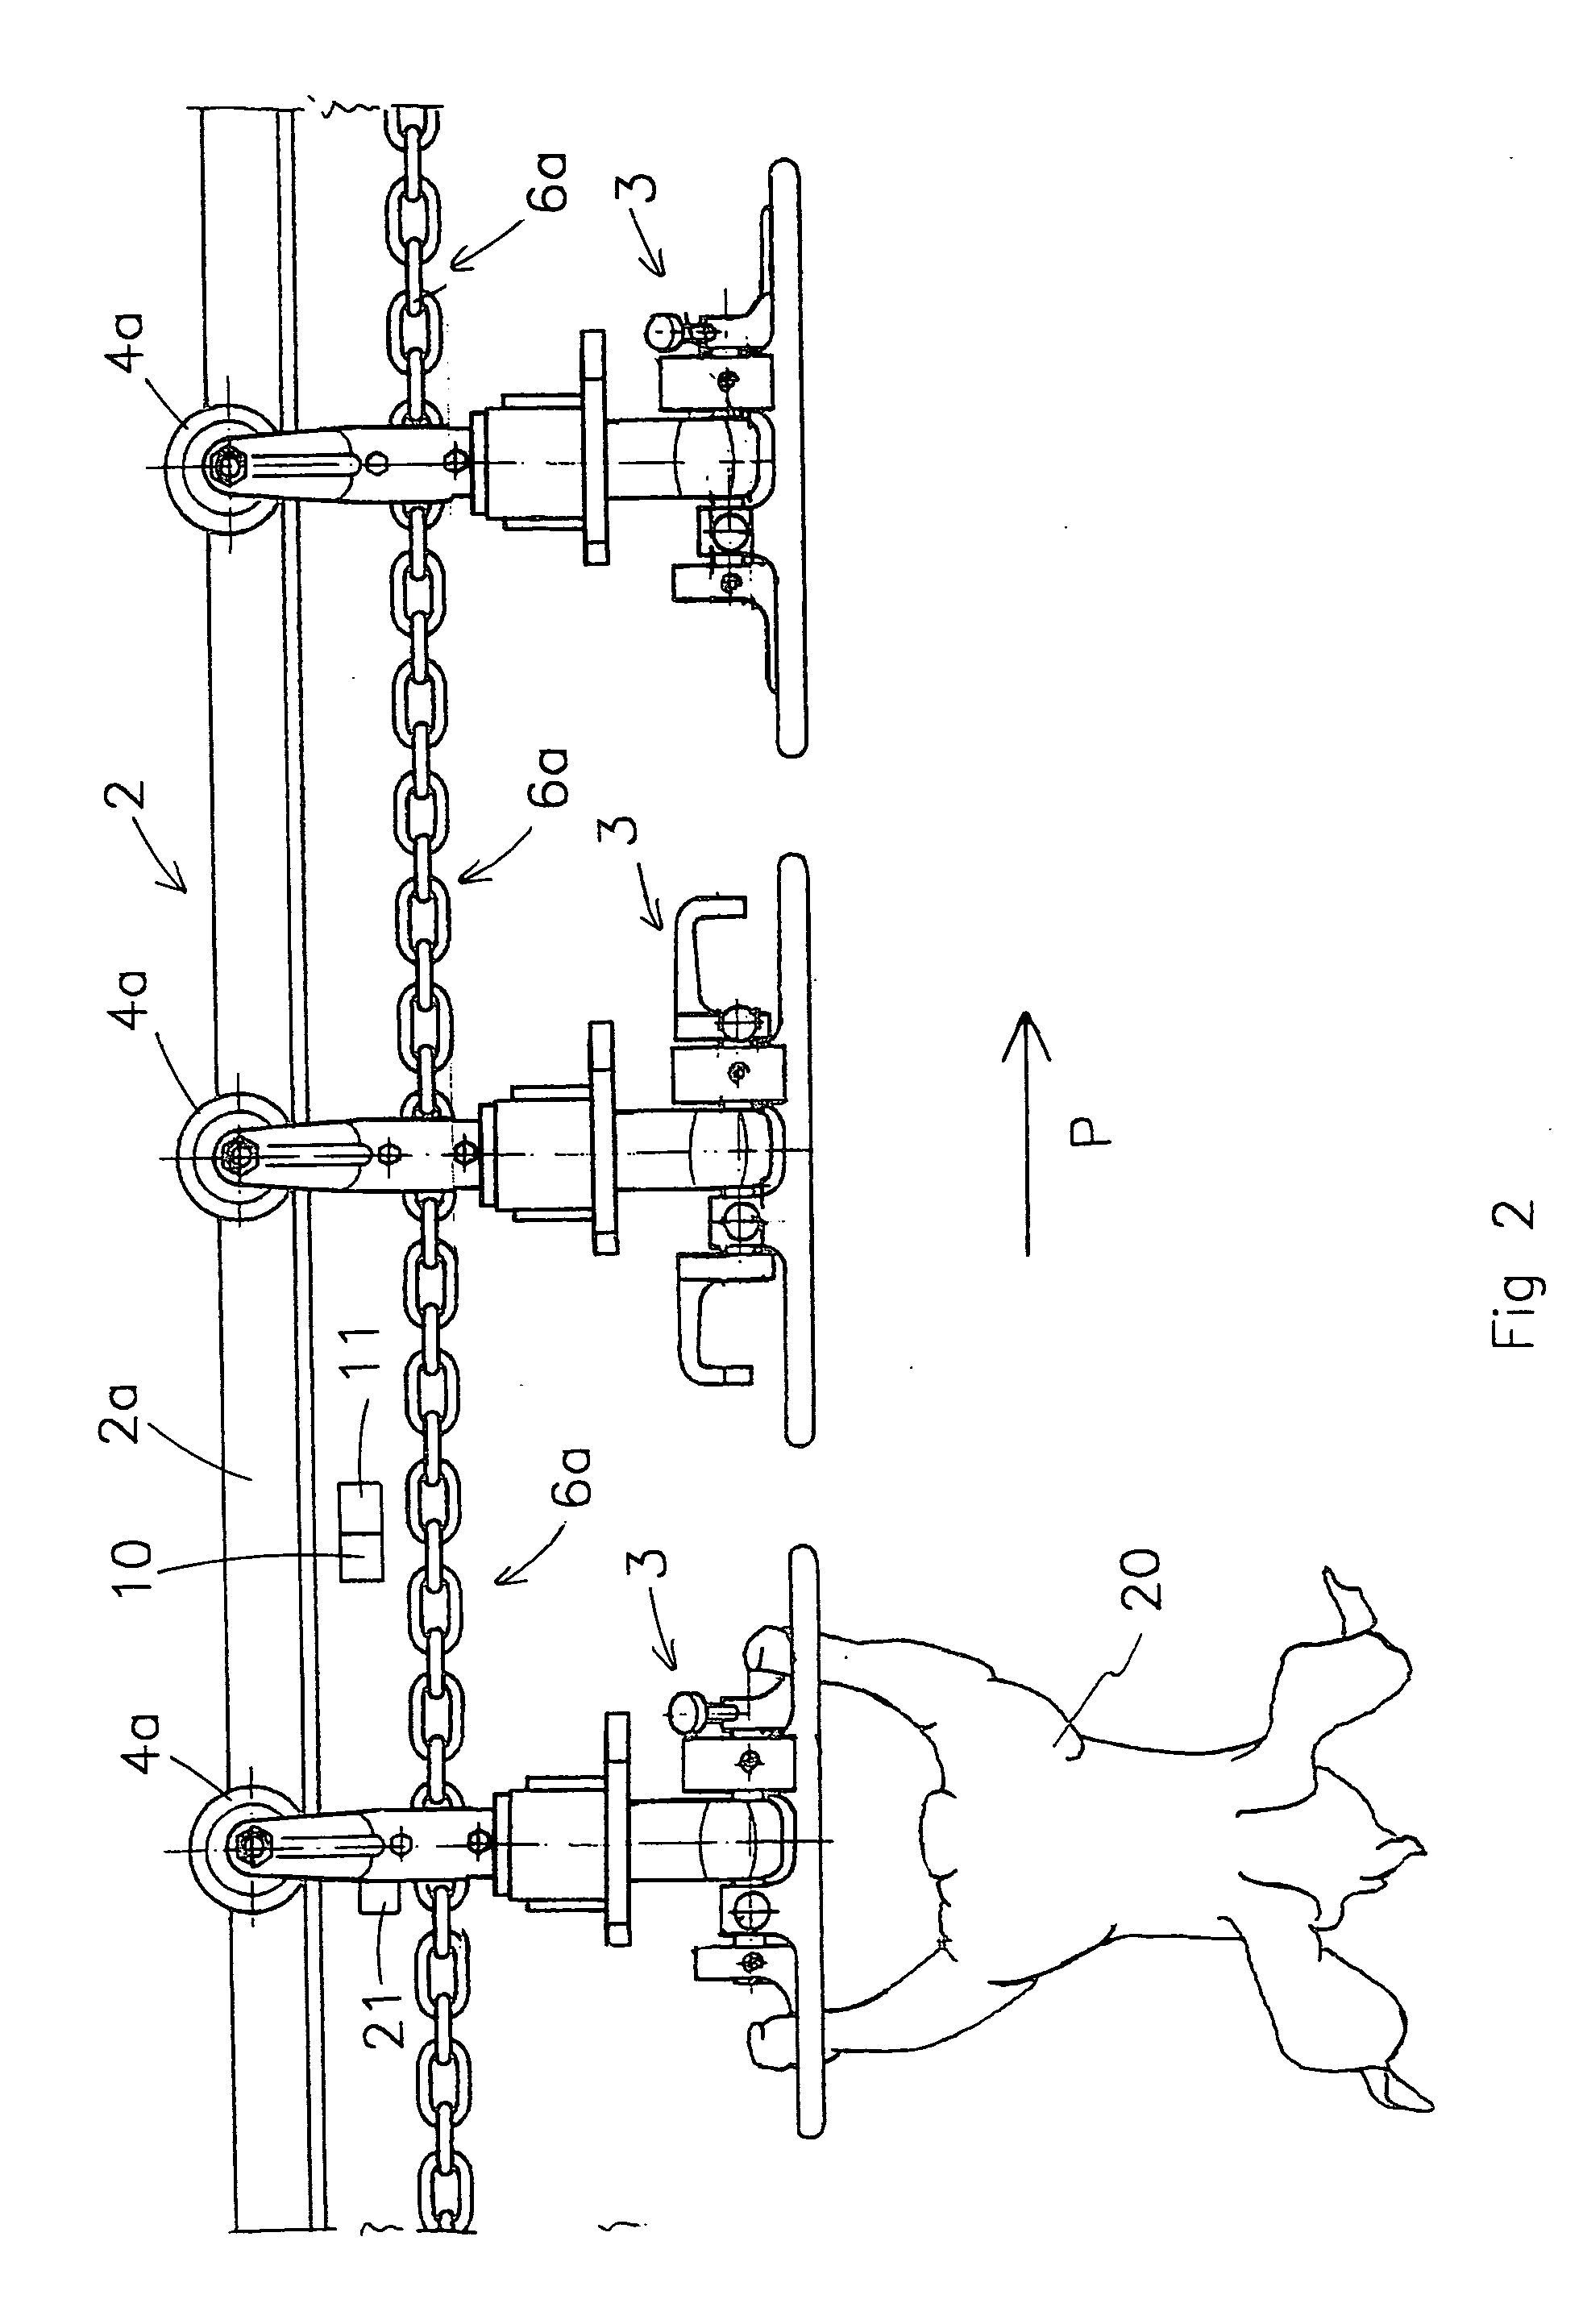 Device and method for processing slaughter animals and/or parts thereof provided with a transportation system